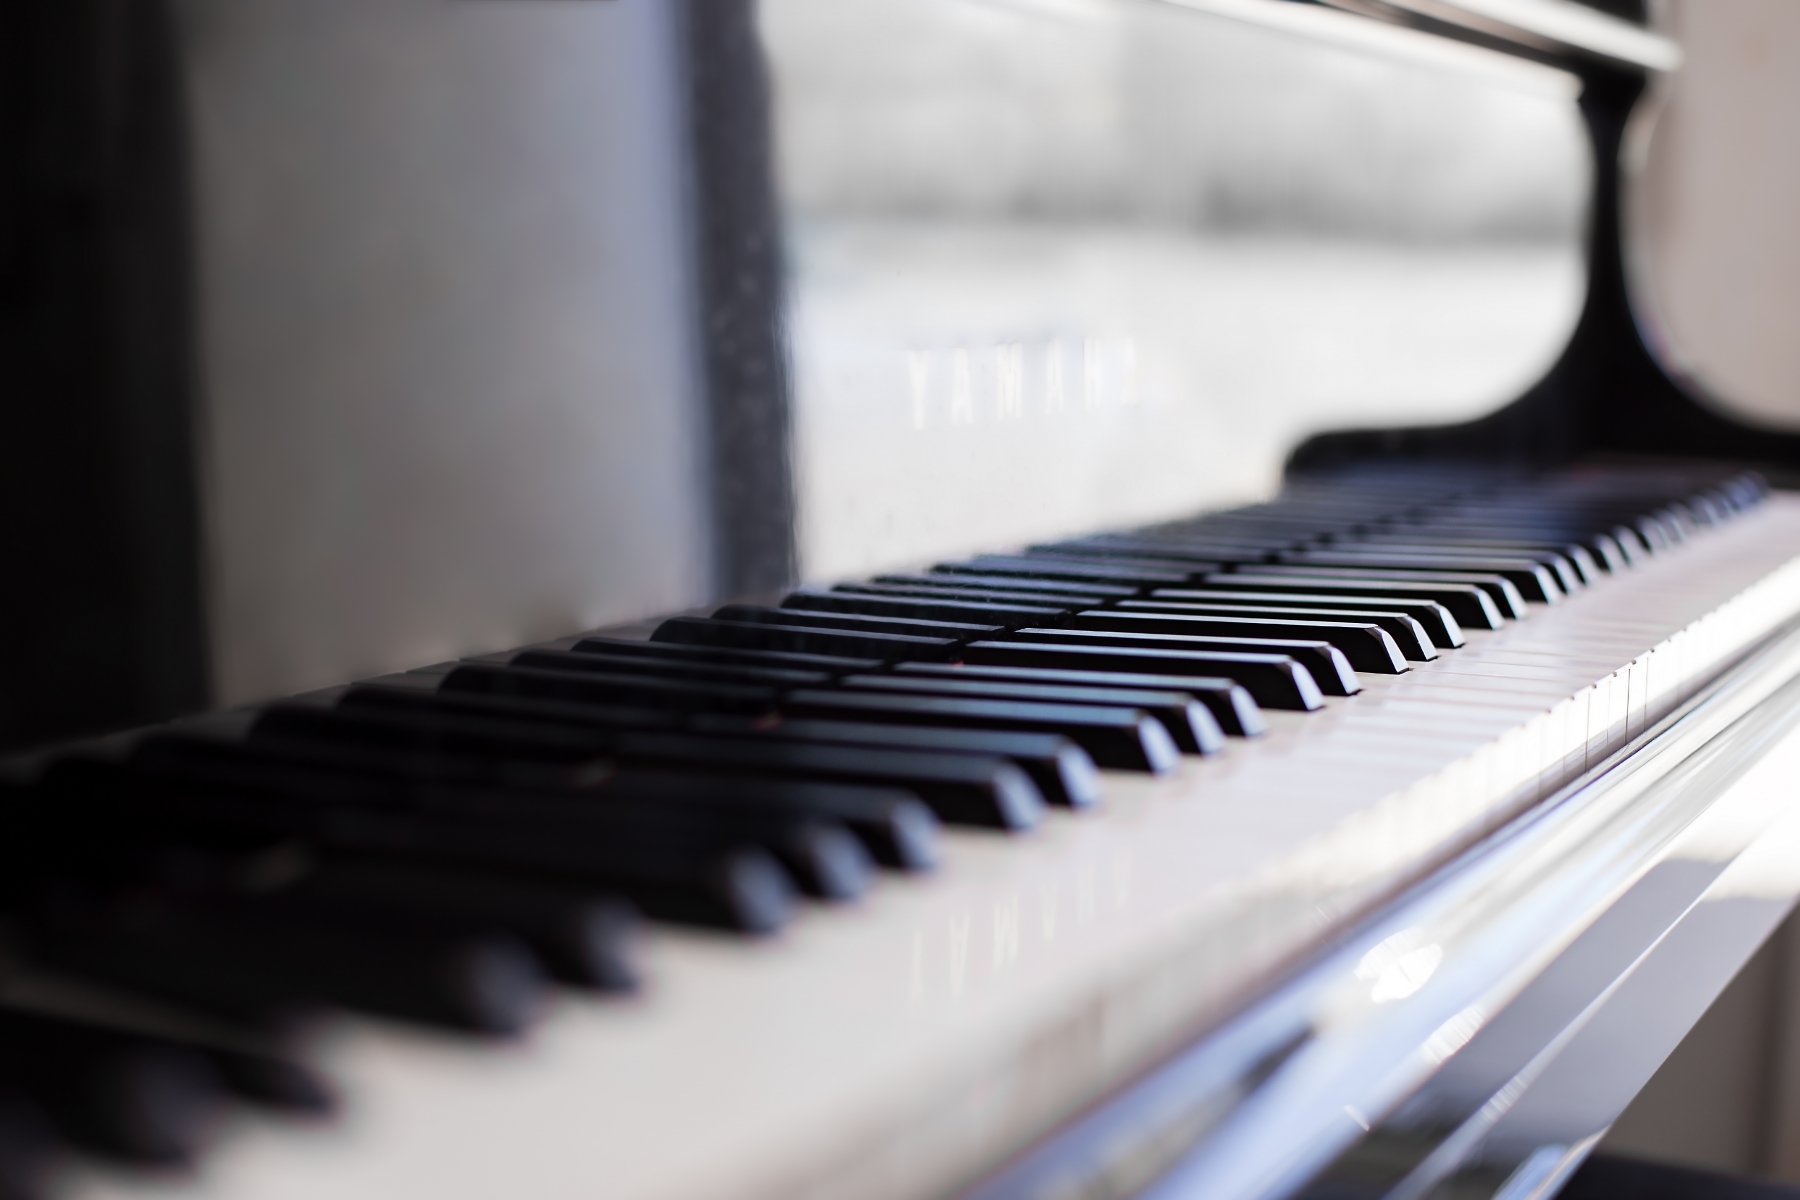 Did we mention the real piano?